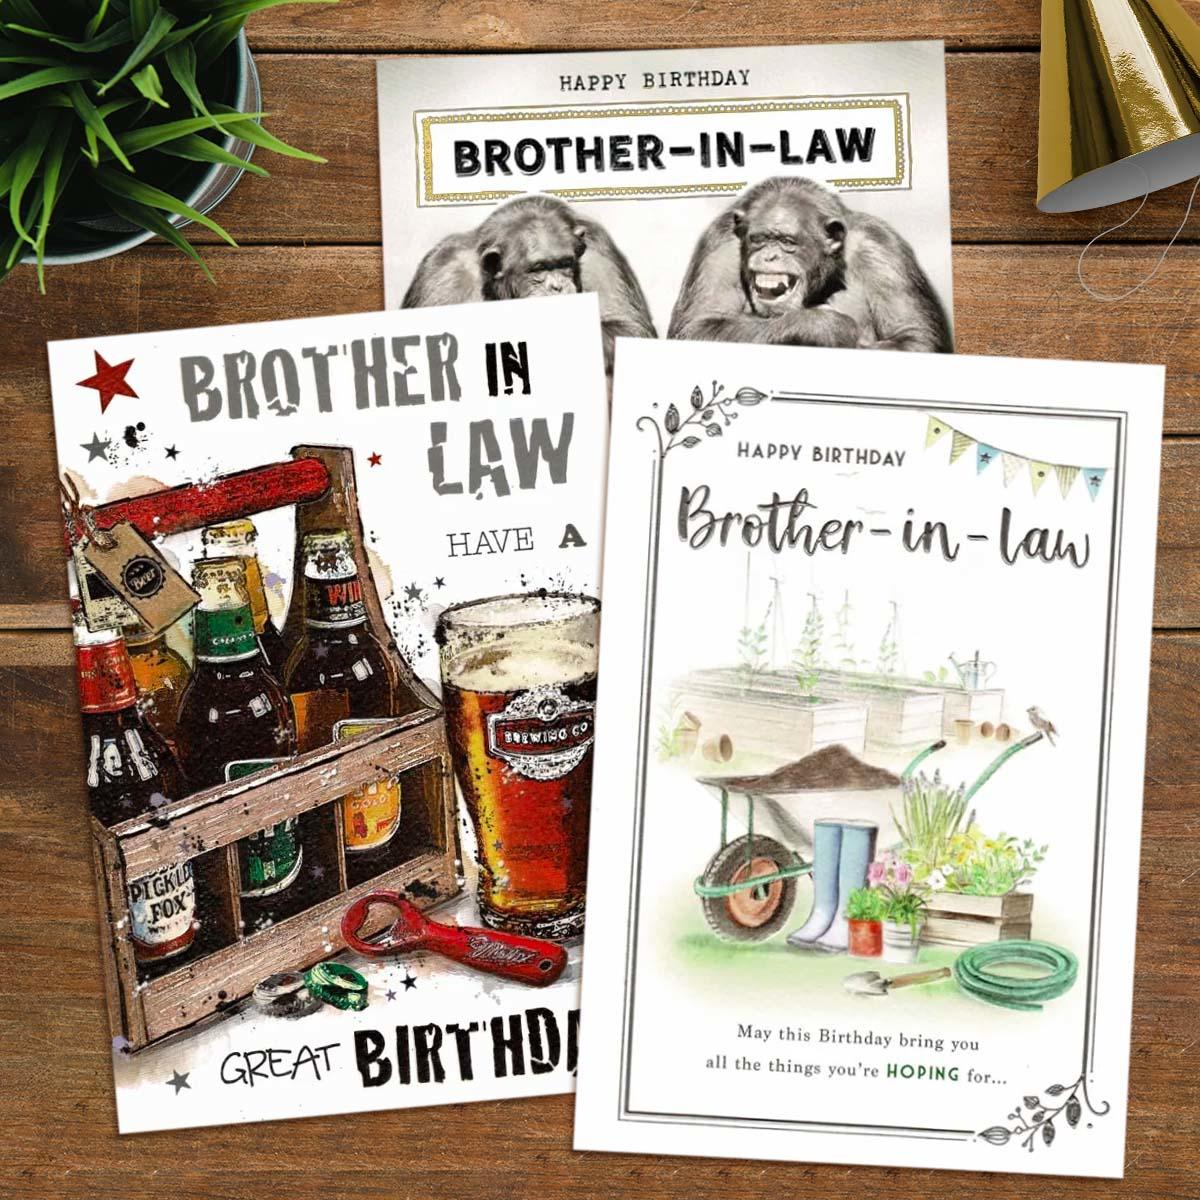 A Selection Of Cards To Show The Depth Of Range In Our Brother In Law Birthday Cards Section